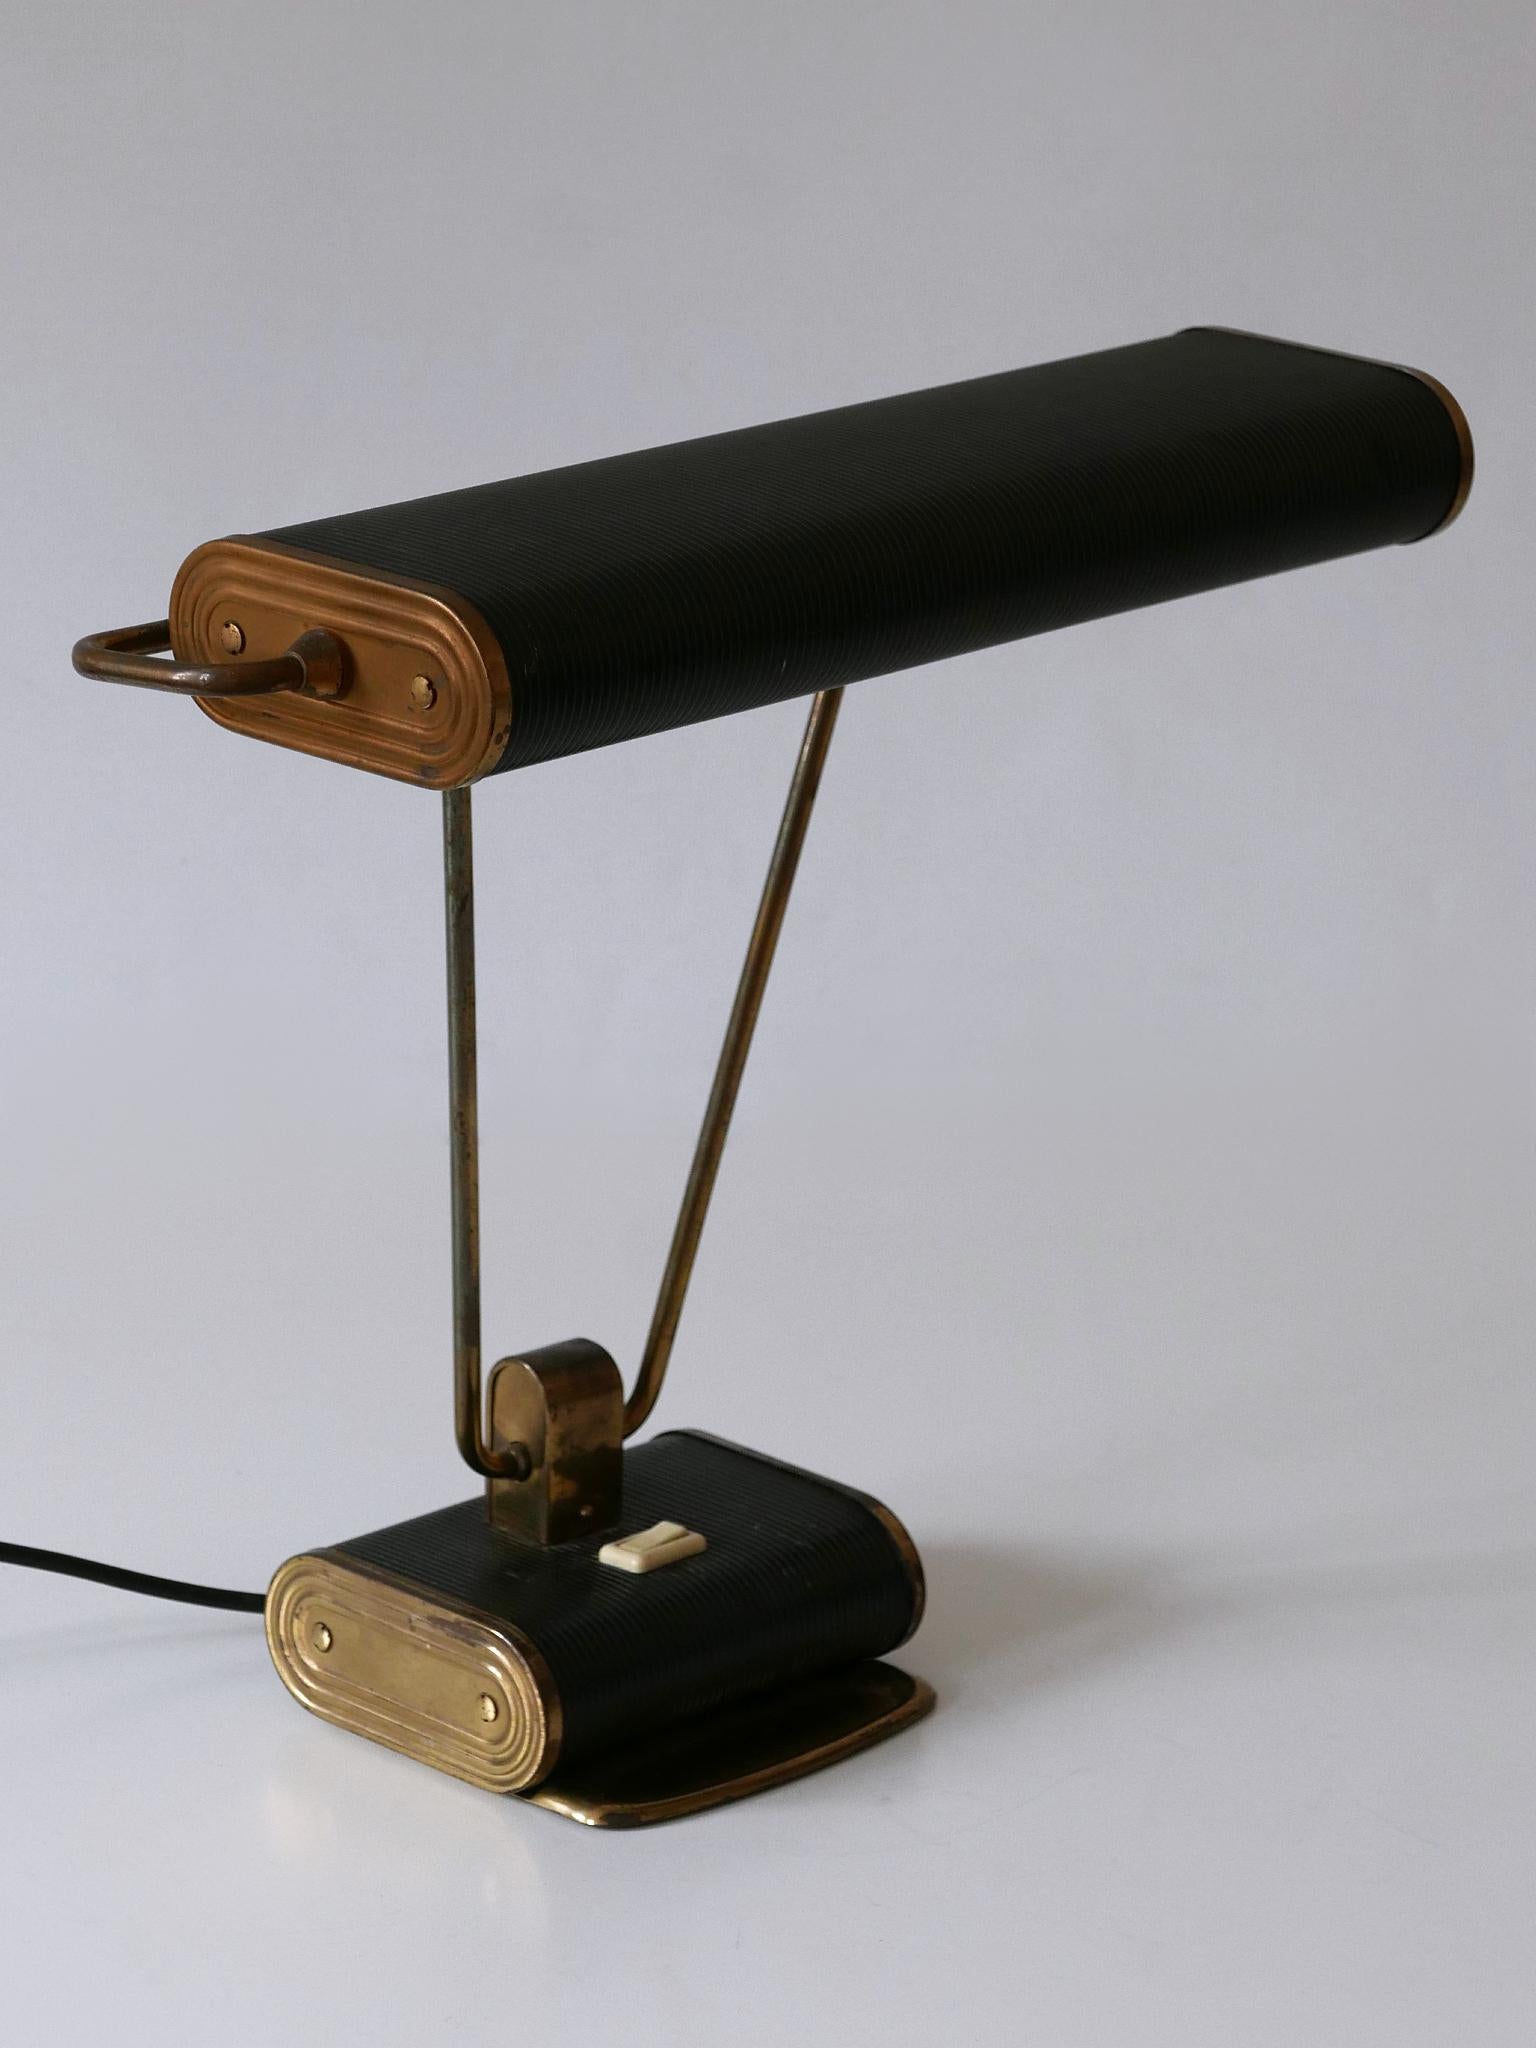 Mid-20th Century Art Deco Table Lamp or Desk Light 'No 71' by André Mounique for Jumo 1930s For Sale